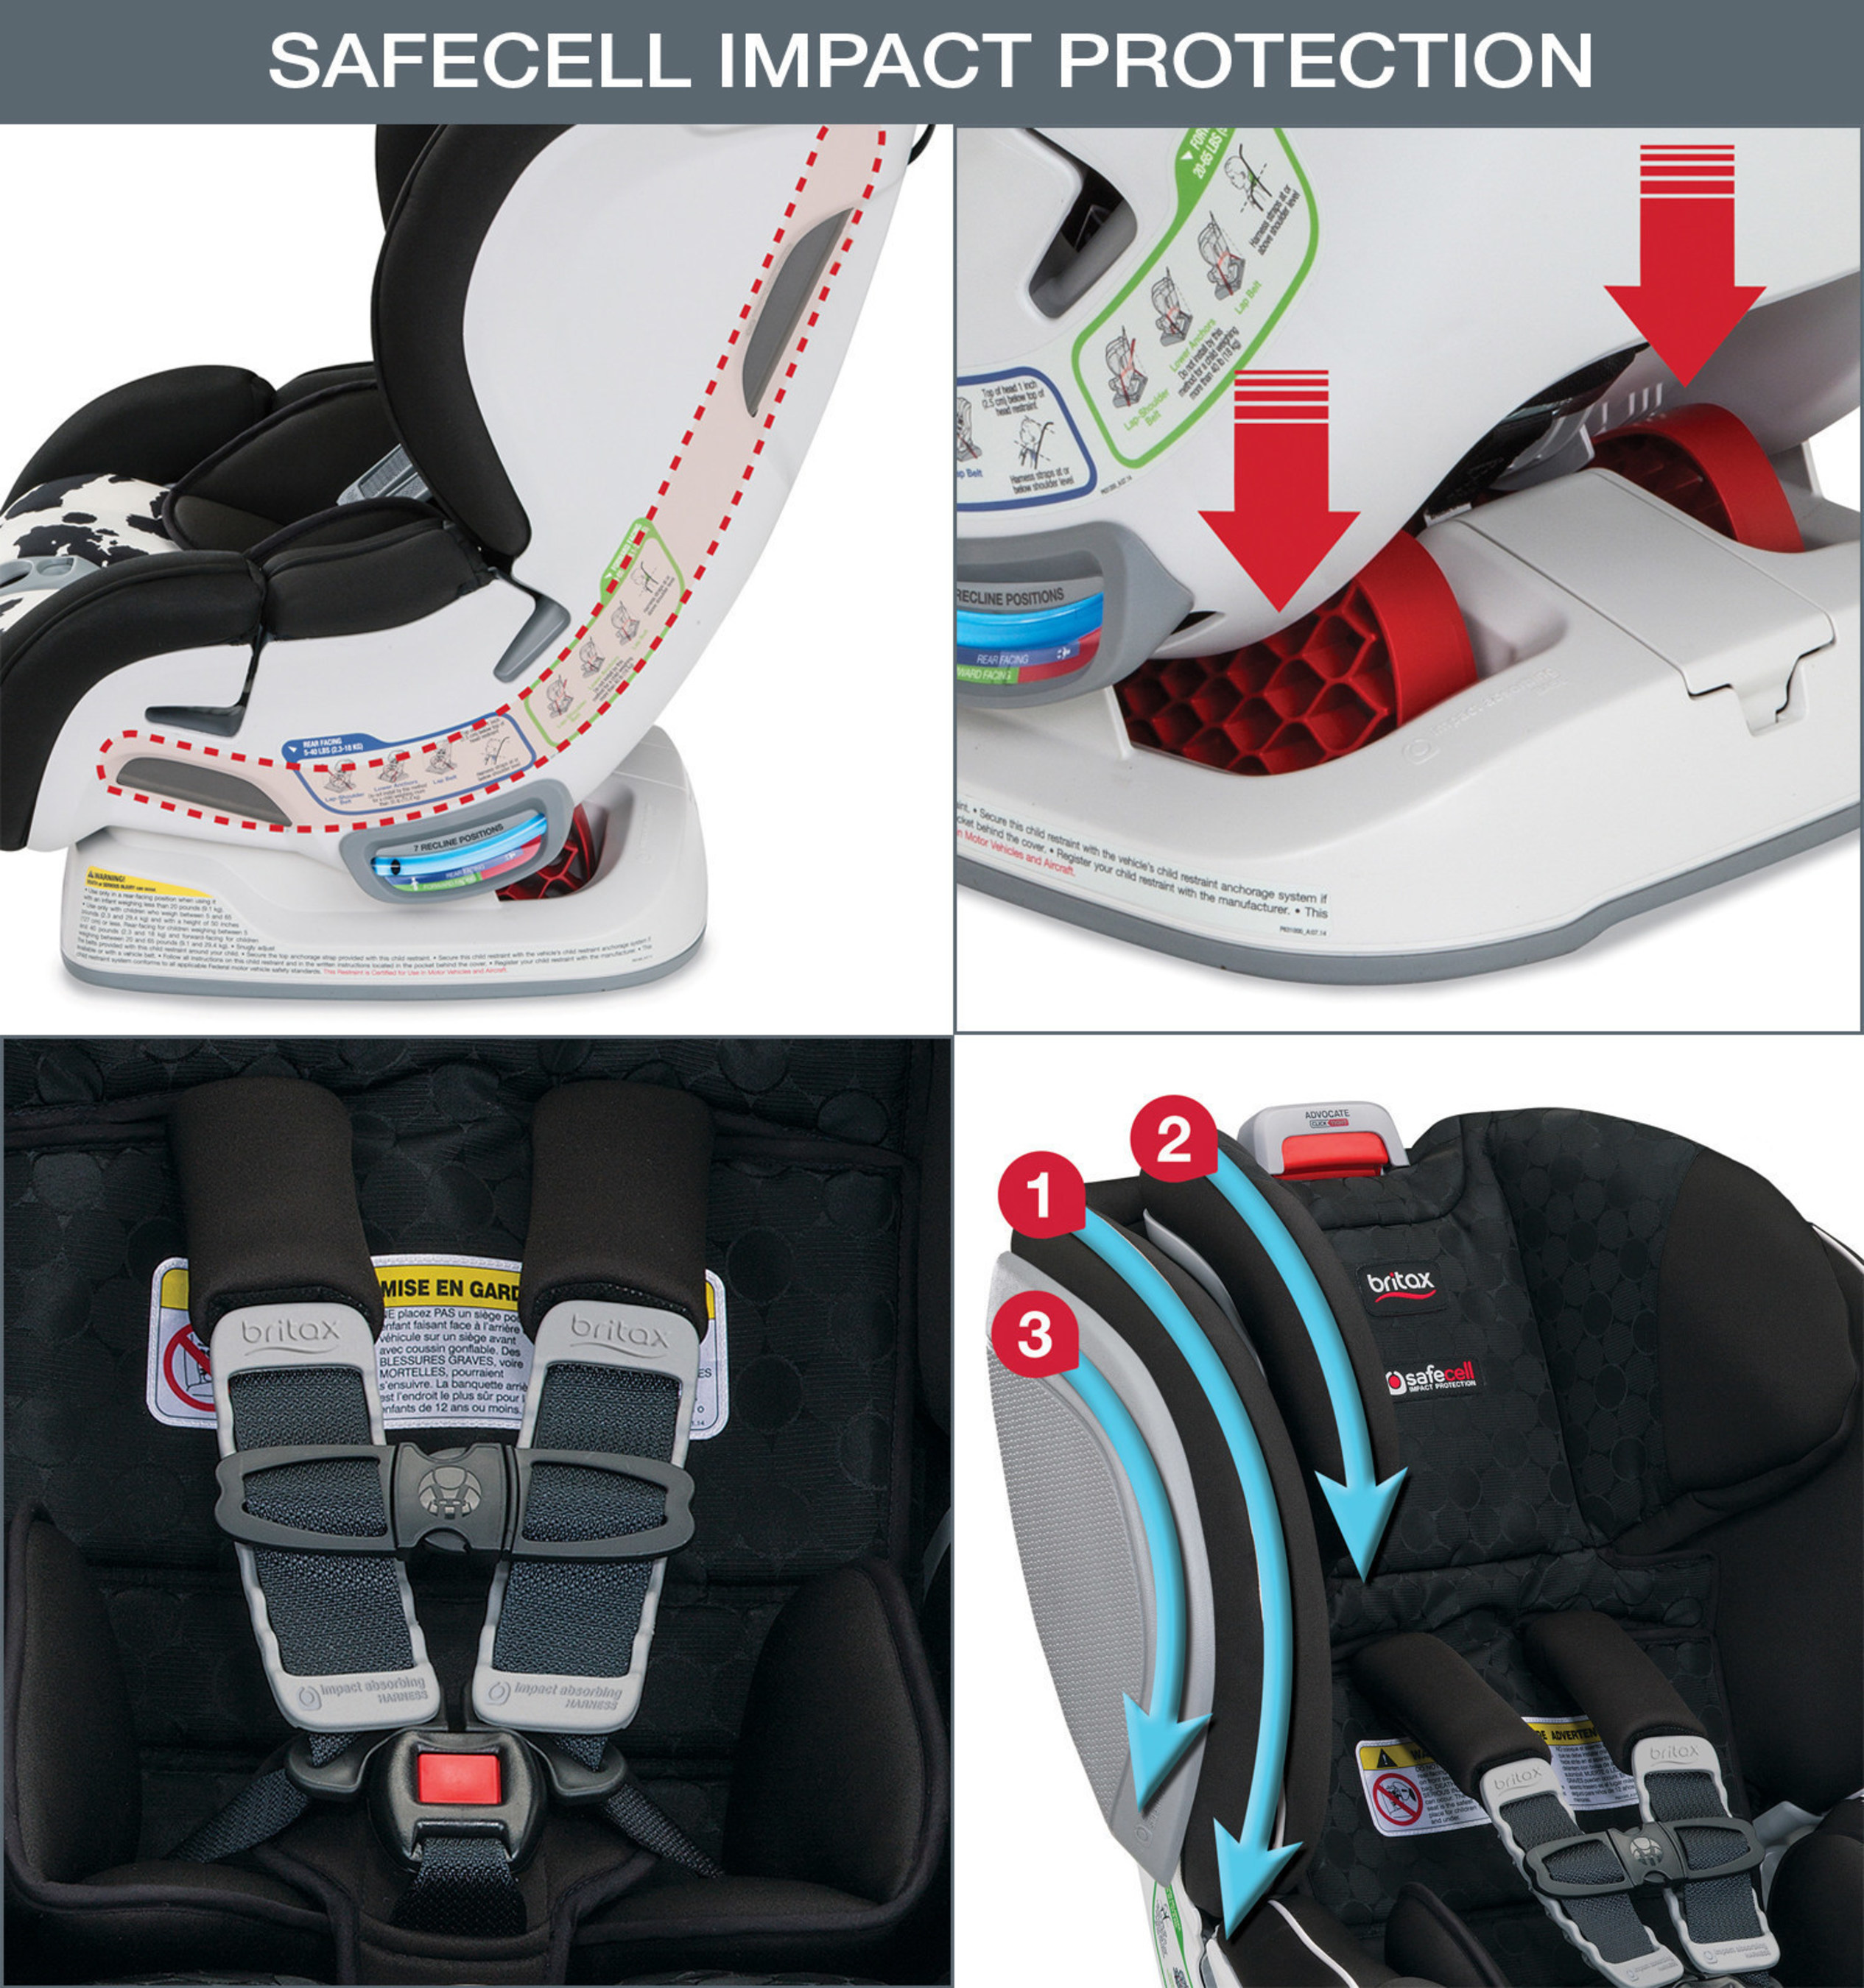 All Britax car seats exclusively feature SafeCell Impact Protection, a system of patented features that work together to lower your child's center of gravity and minimize head excursion